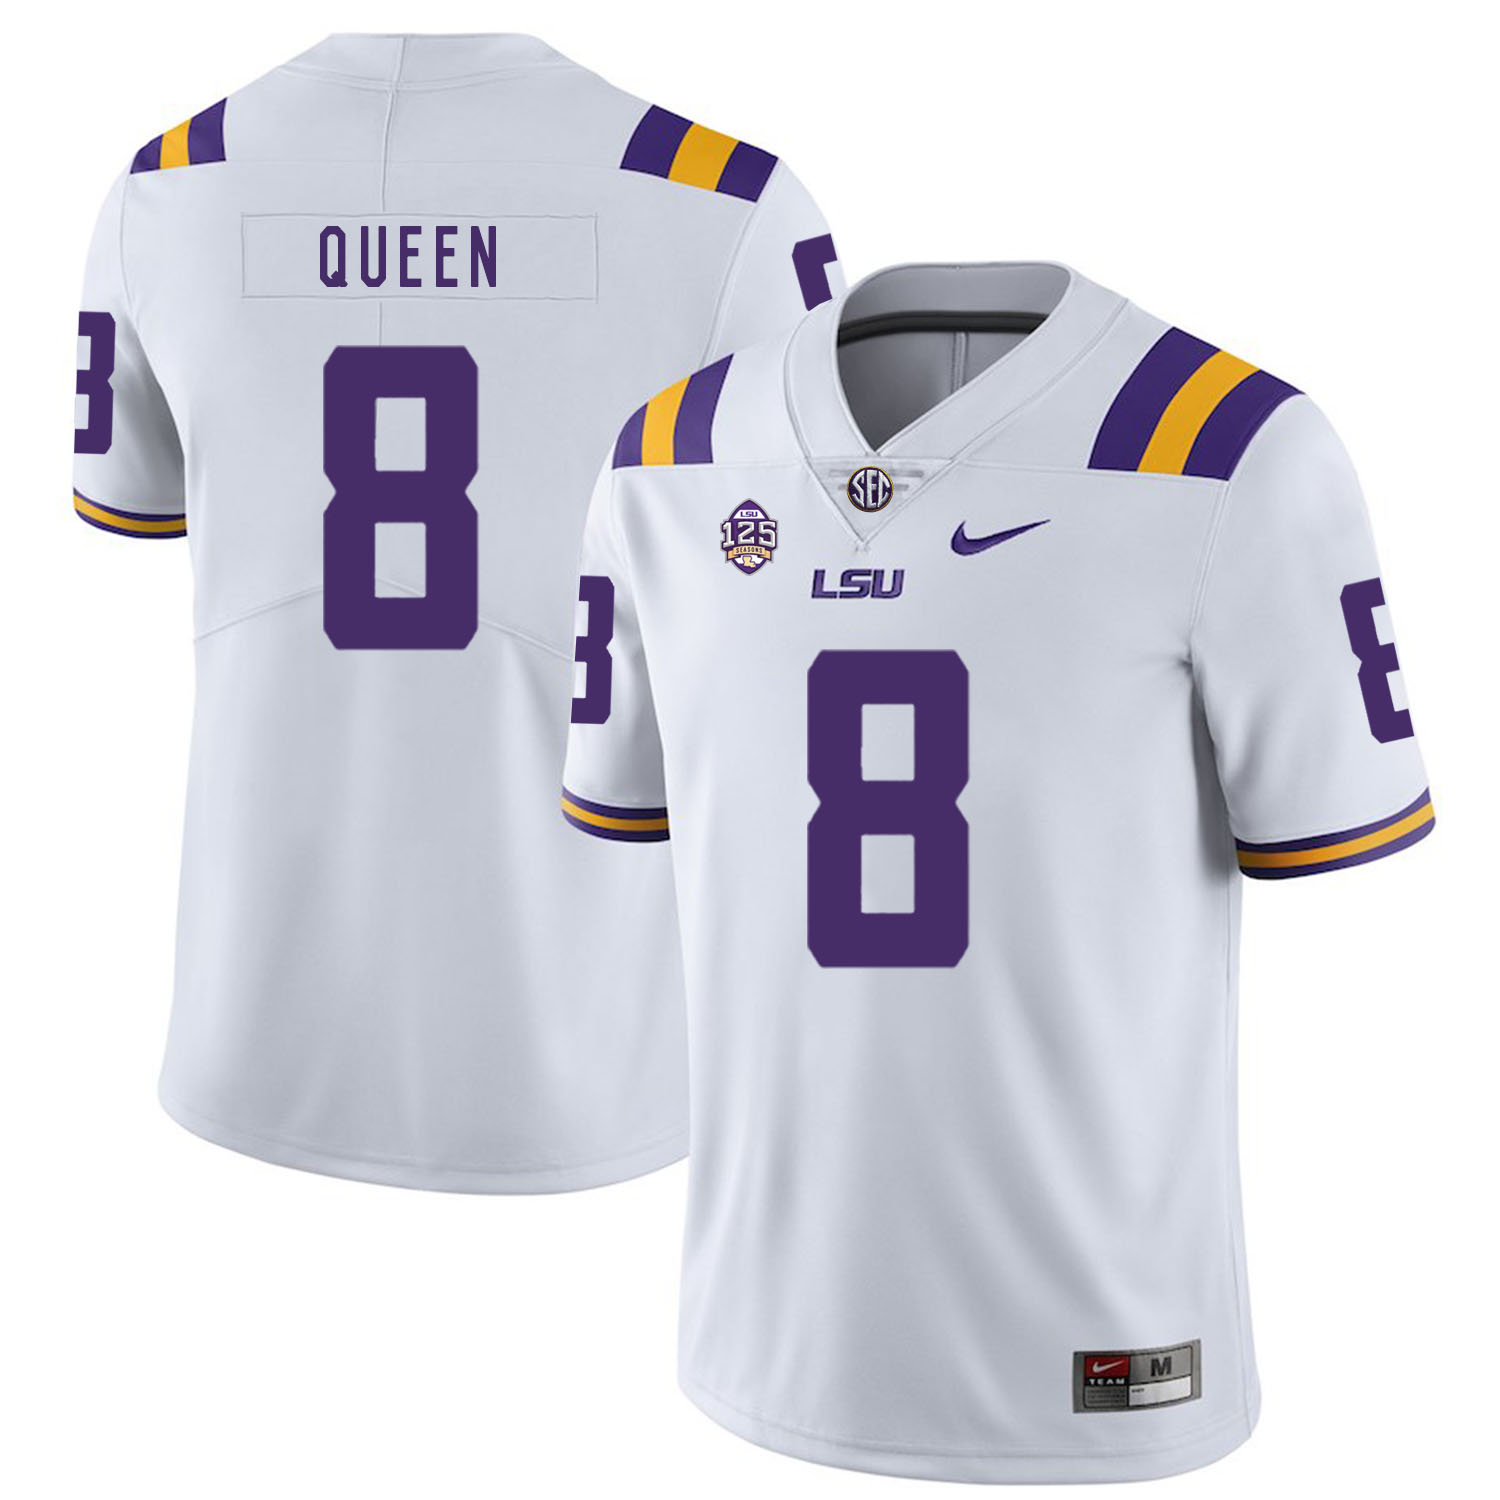 LSU Tigers 8 Patrick Queen White Nike College Football Jersey